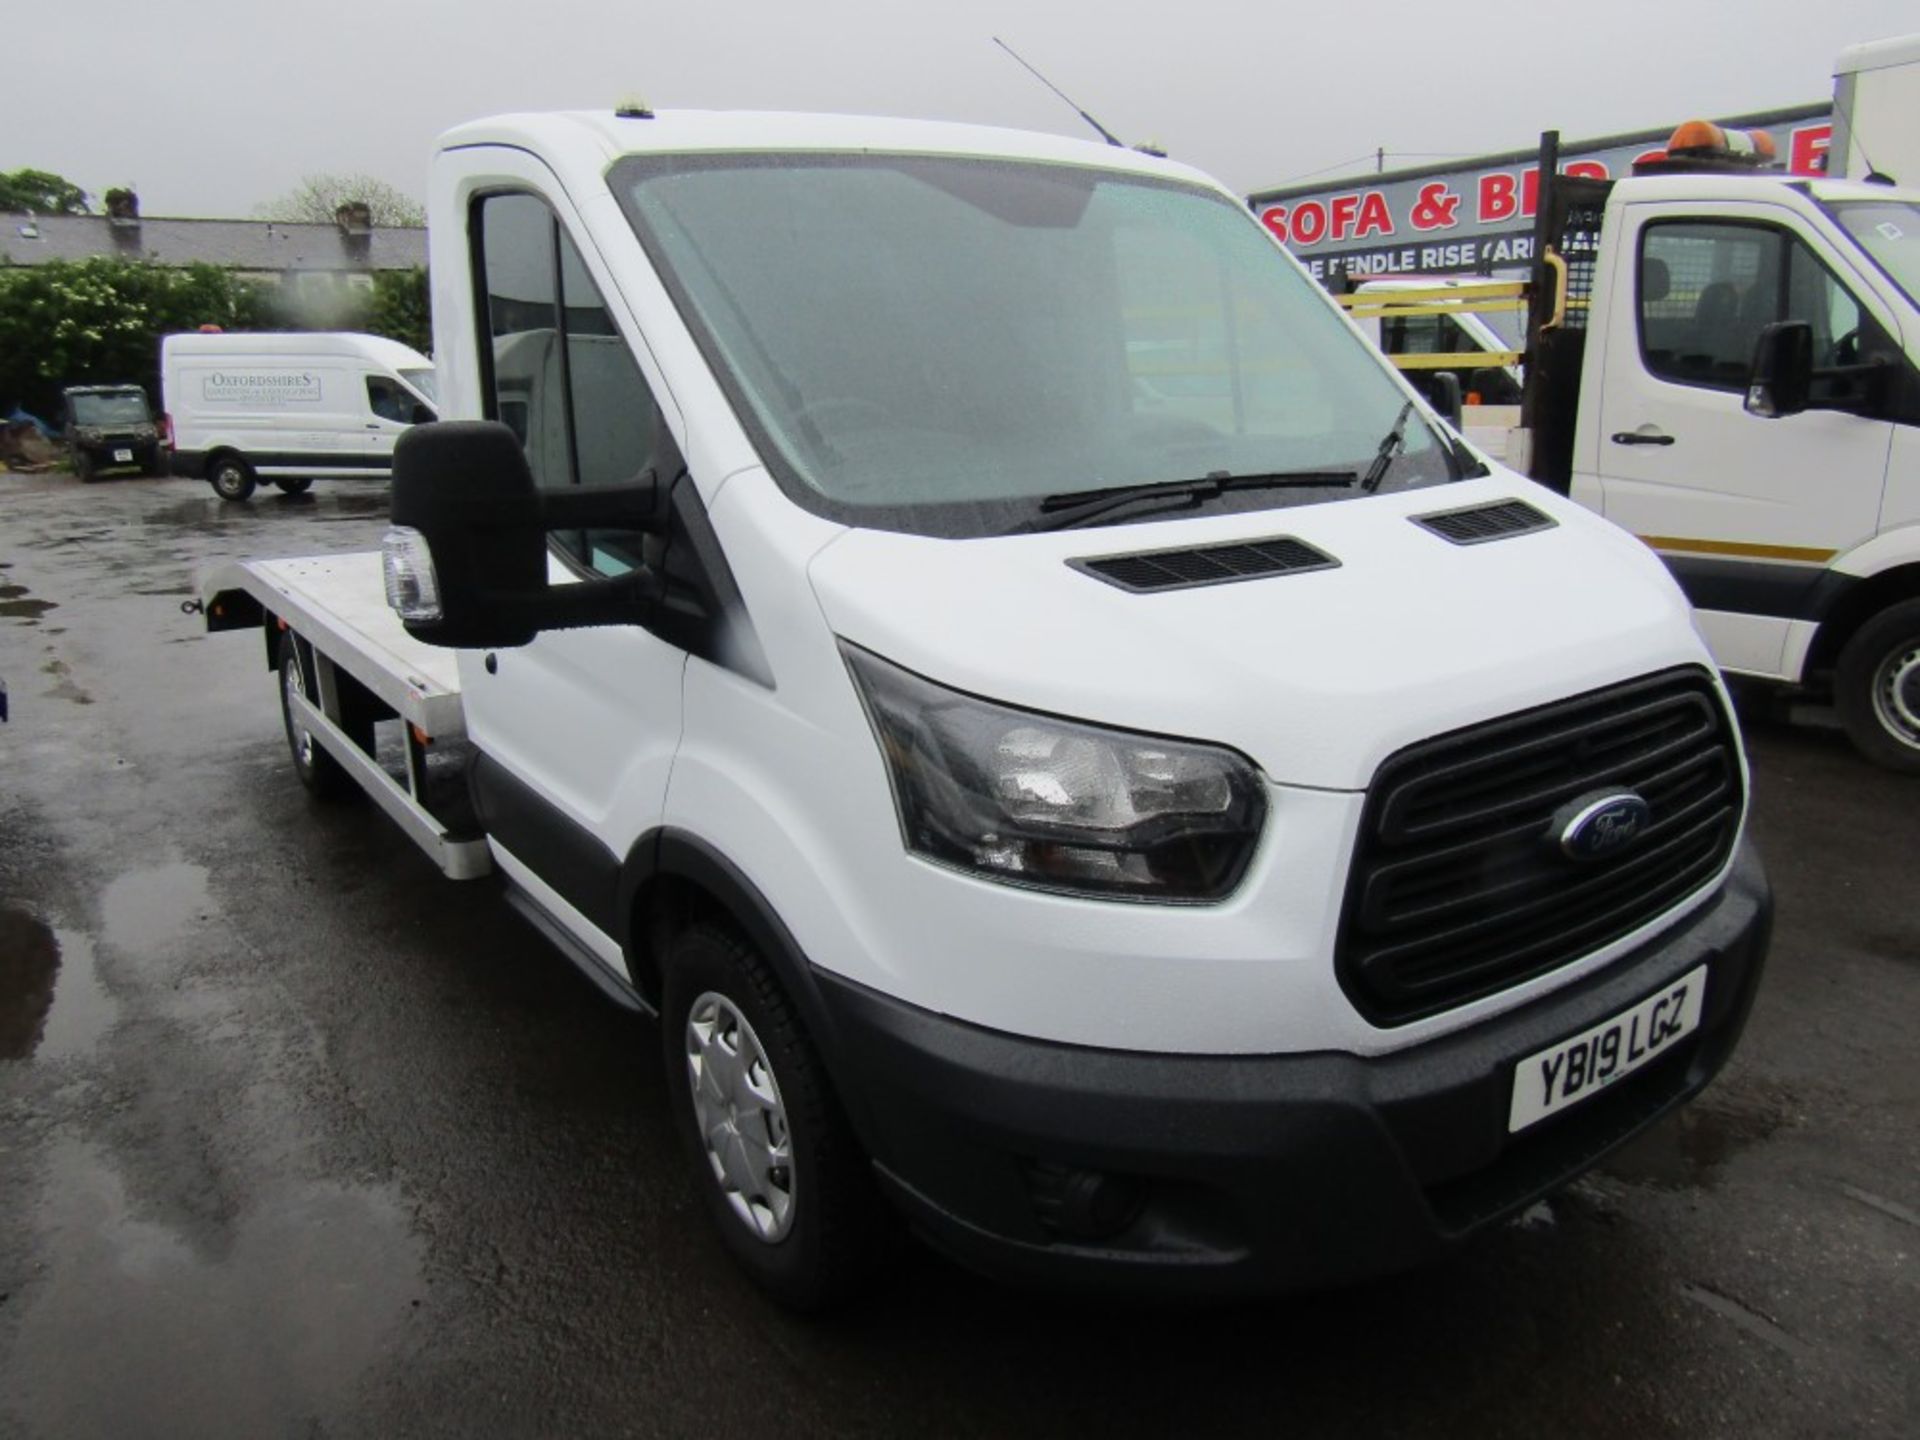 19 reg FORD TRANSIT 350 RECOVERY UNIT NISSAN BODY & WINCH, 1ST REG 06/19, 51931M WARRANTED, V5 HERE,